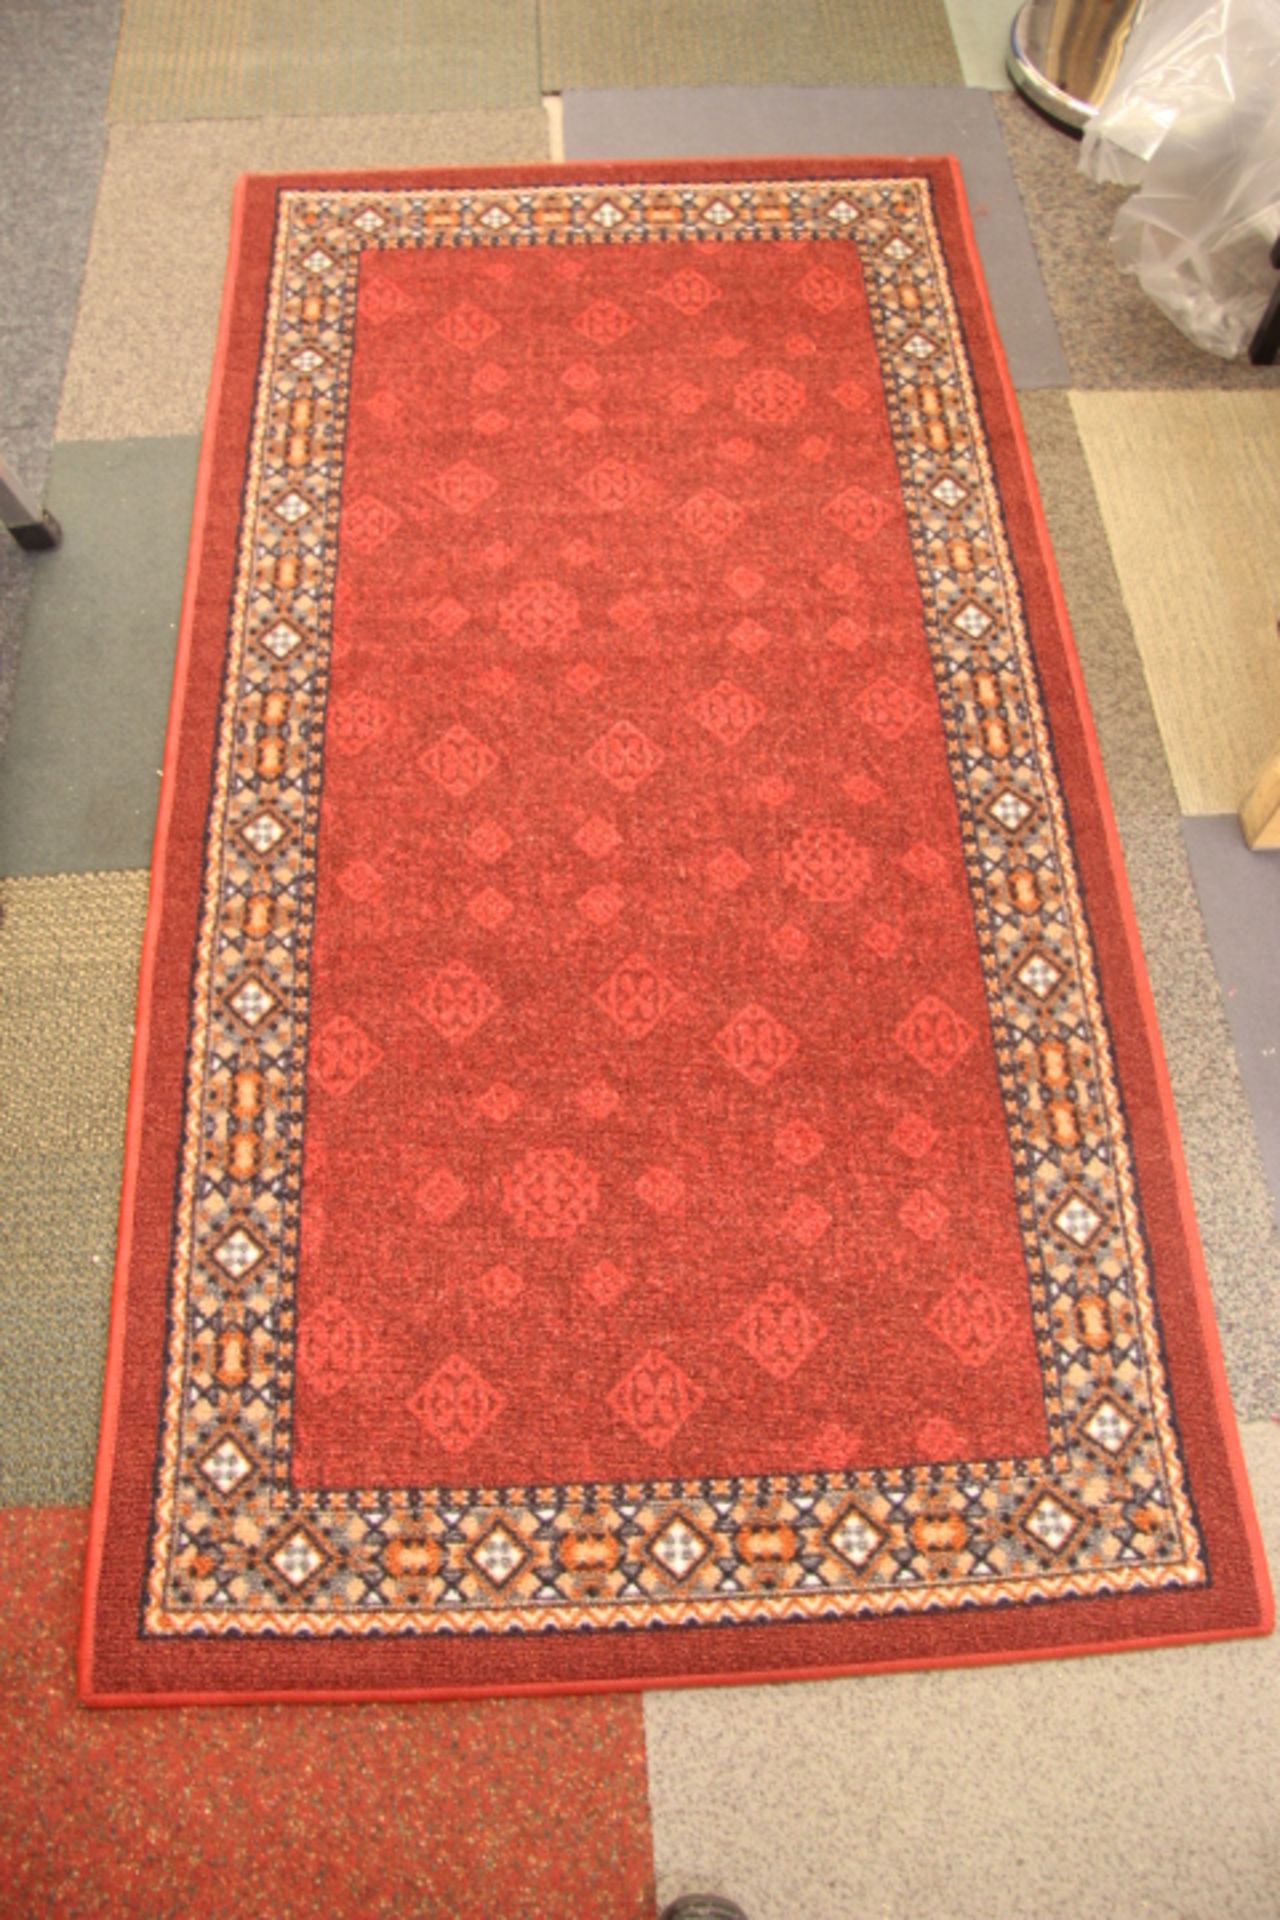 V *TRADE QTY* Brand New 80 X 150cm Burgundy Decorative Rug X 50 YOUR BID PRICE TO BE MULTIPLIED BY